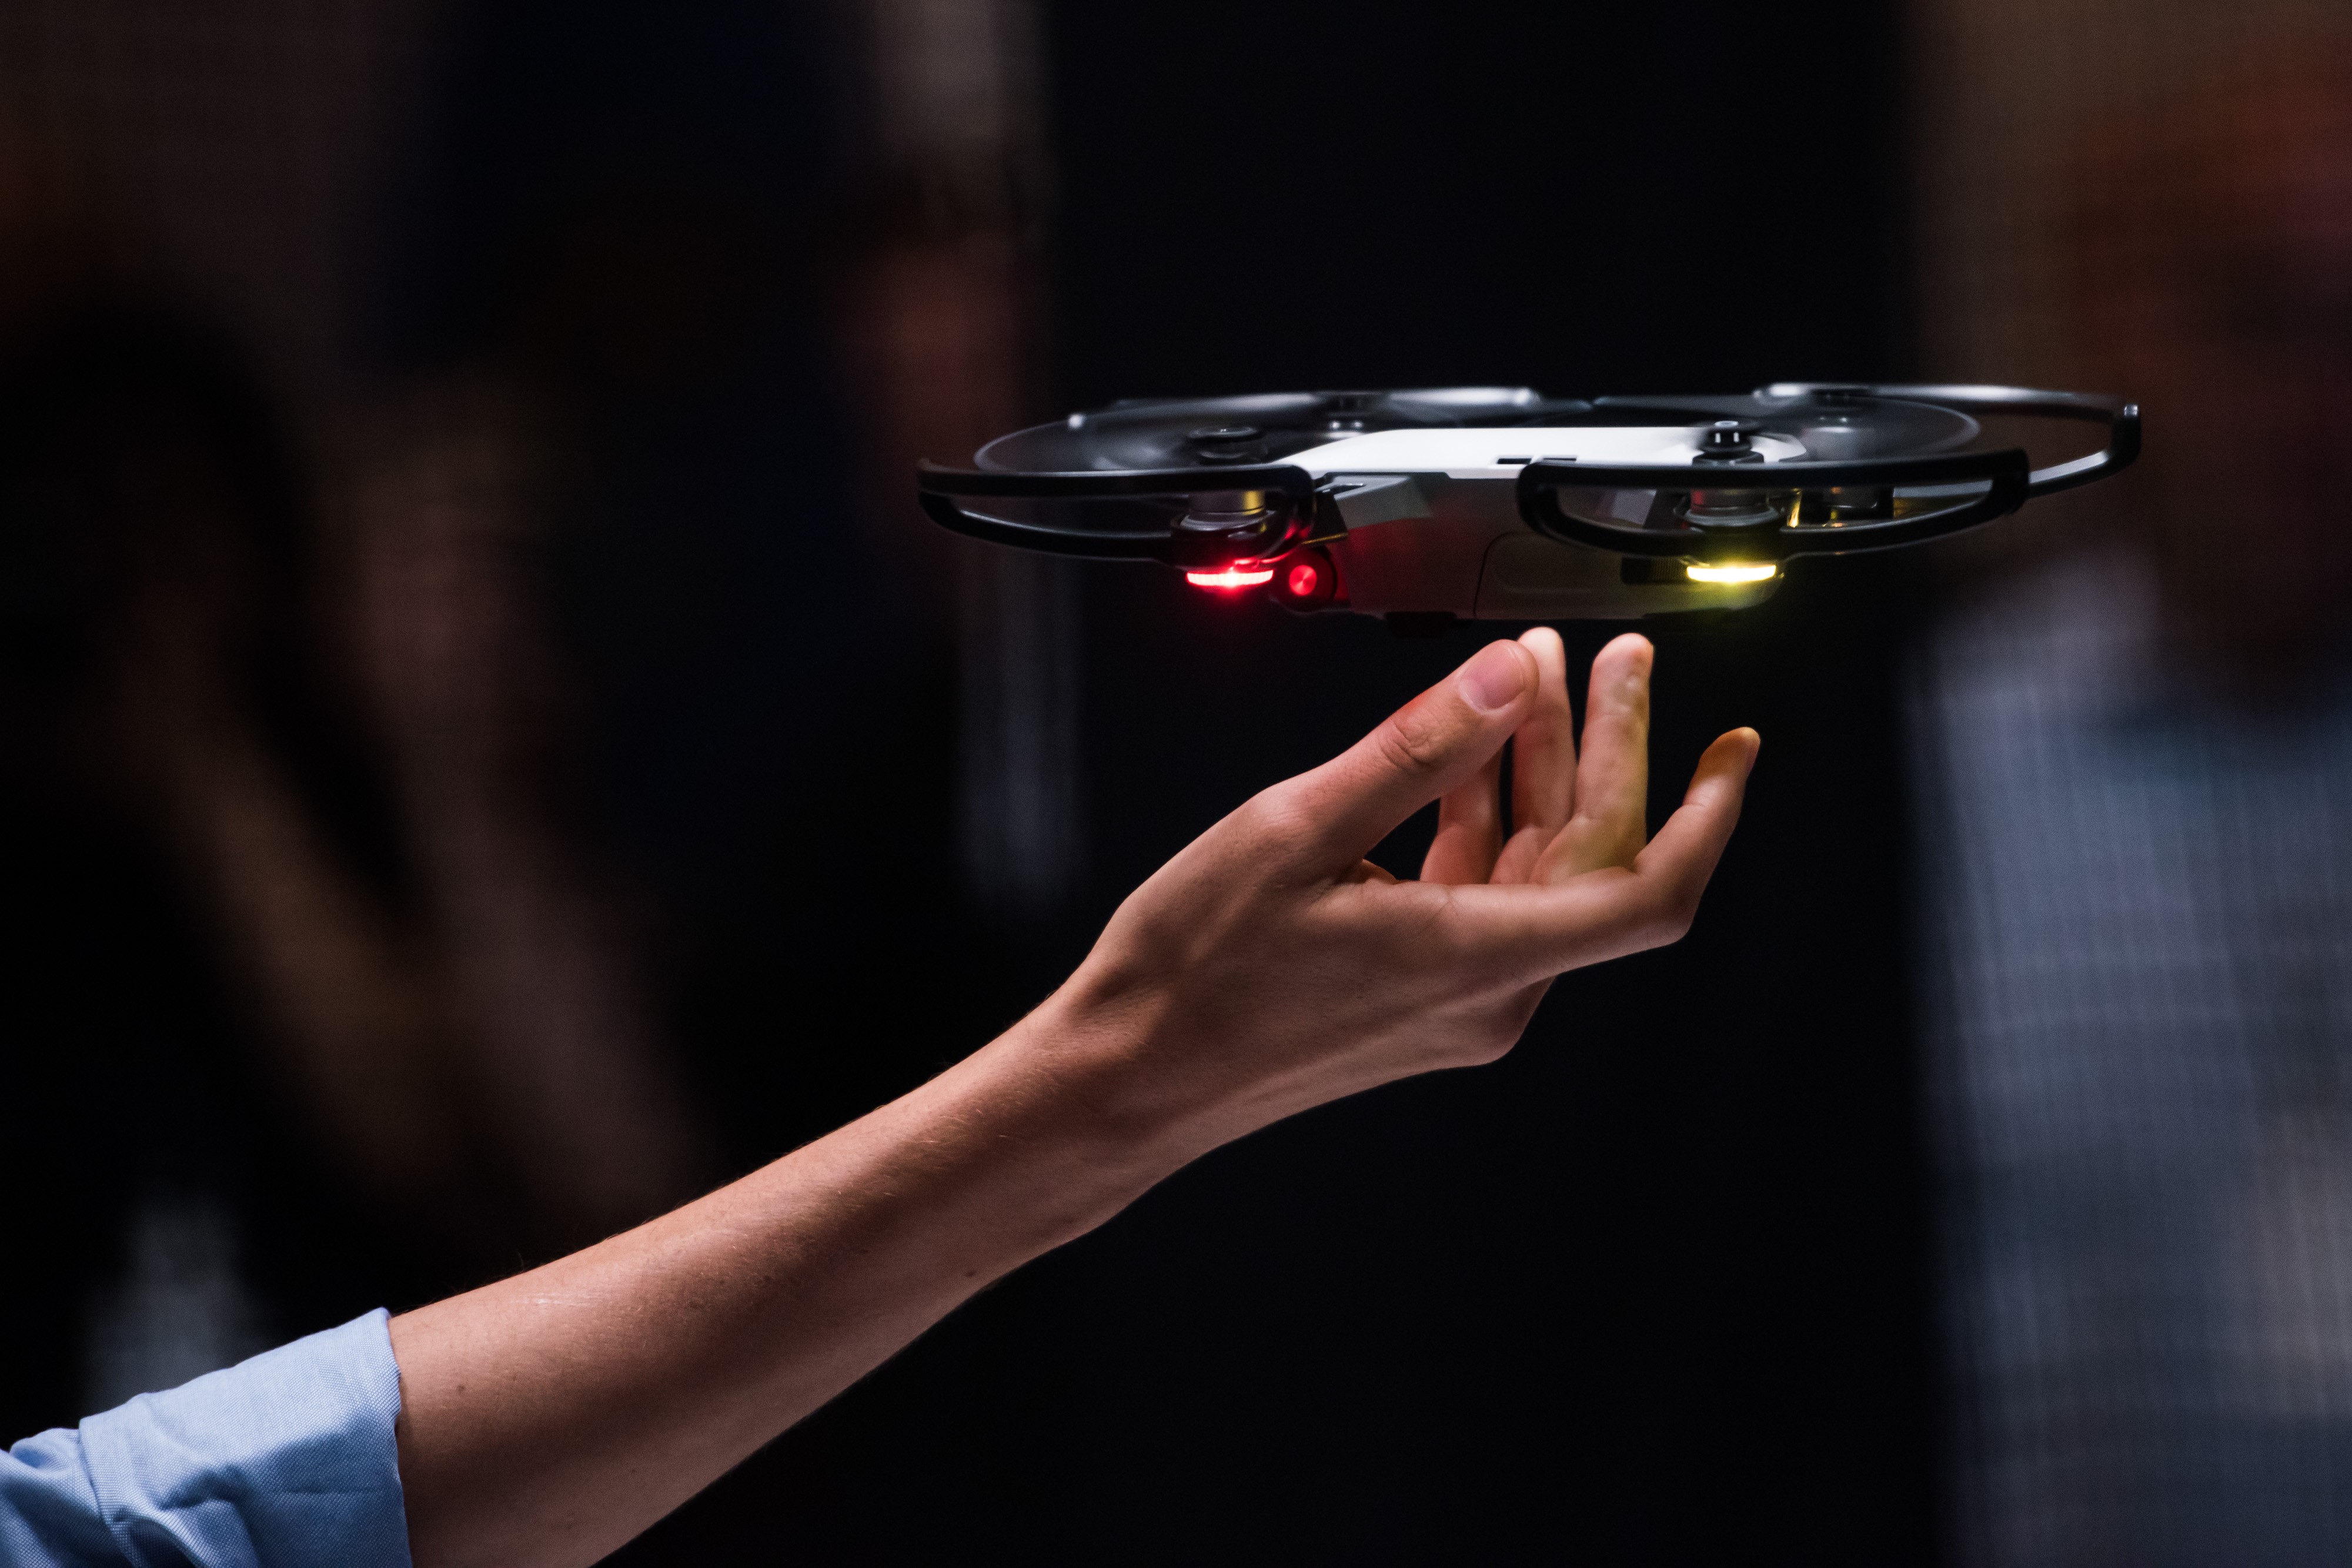 The gesture-controlled Spark drone can take off and land on the palm of your hand. Photo: Bloomberg